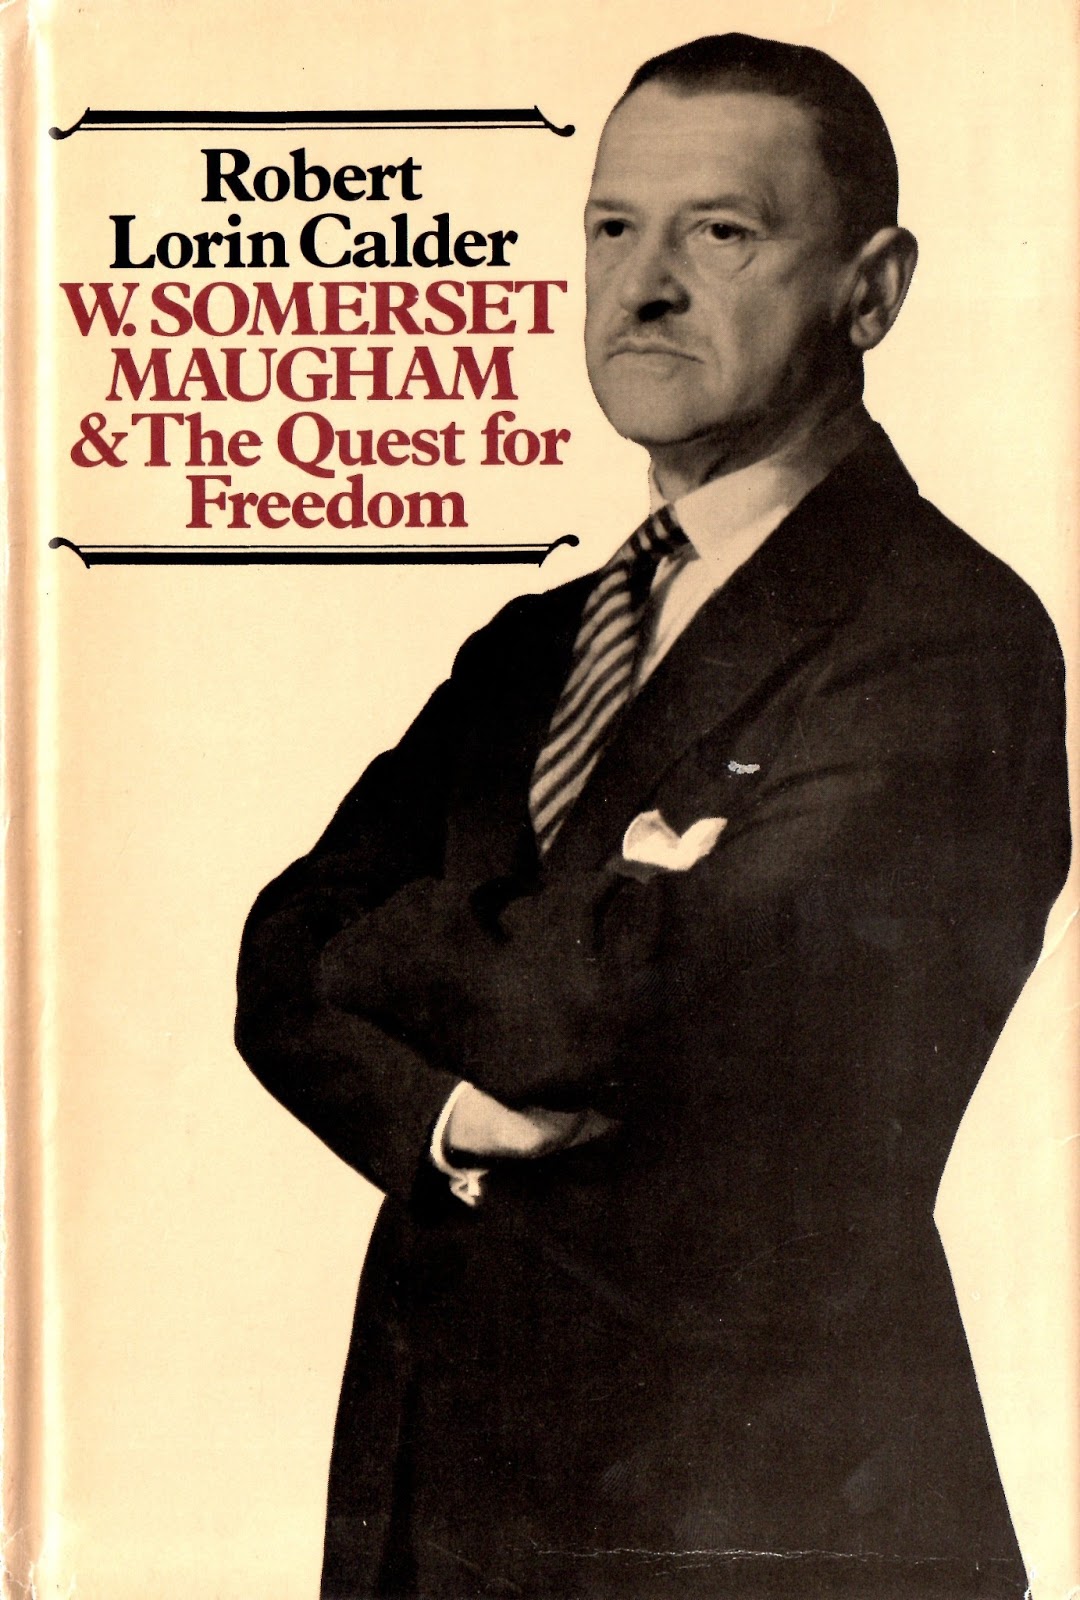 Please provide a critical analysis of W. Somerset Maugham's short story 